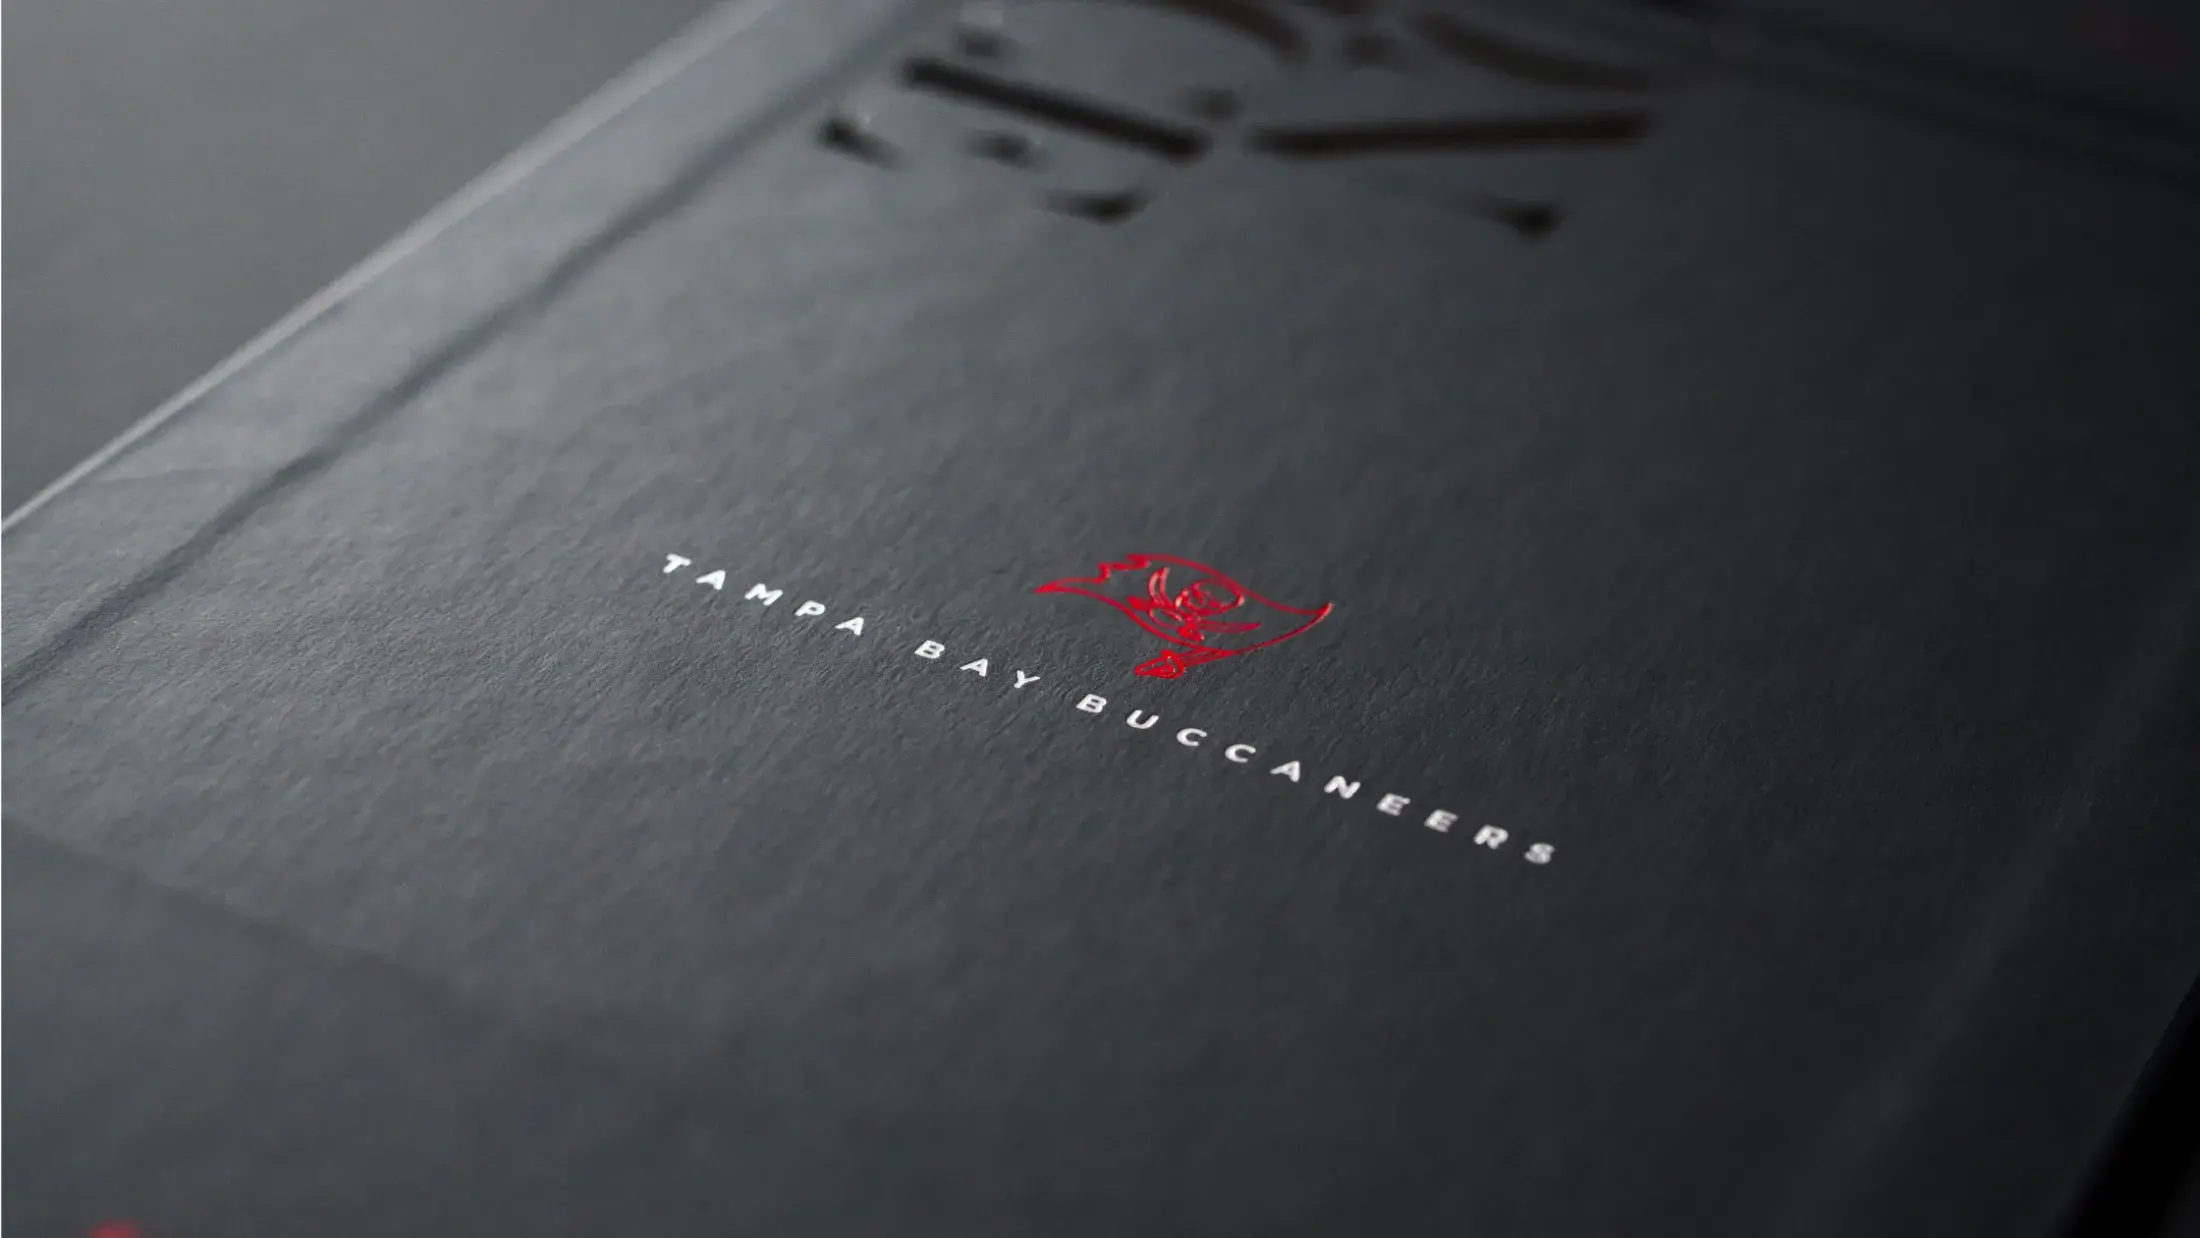 Inside of sleeve - red and silver foil design of TBB logo